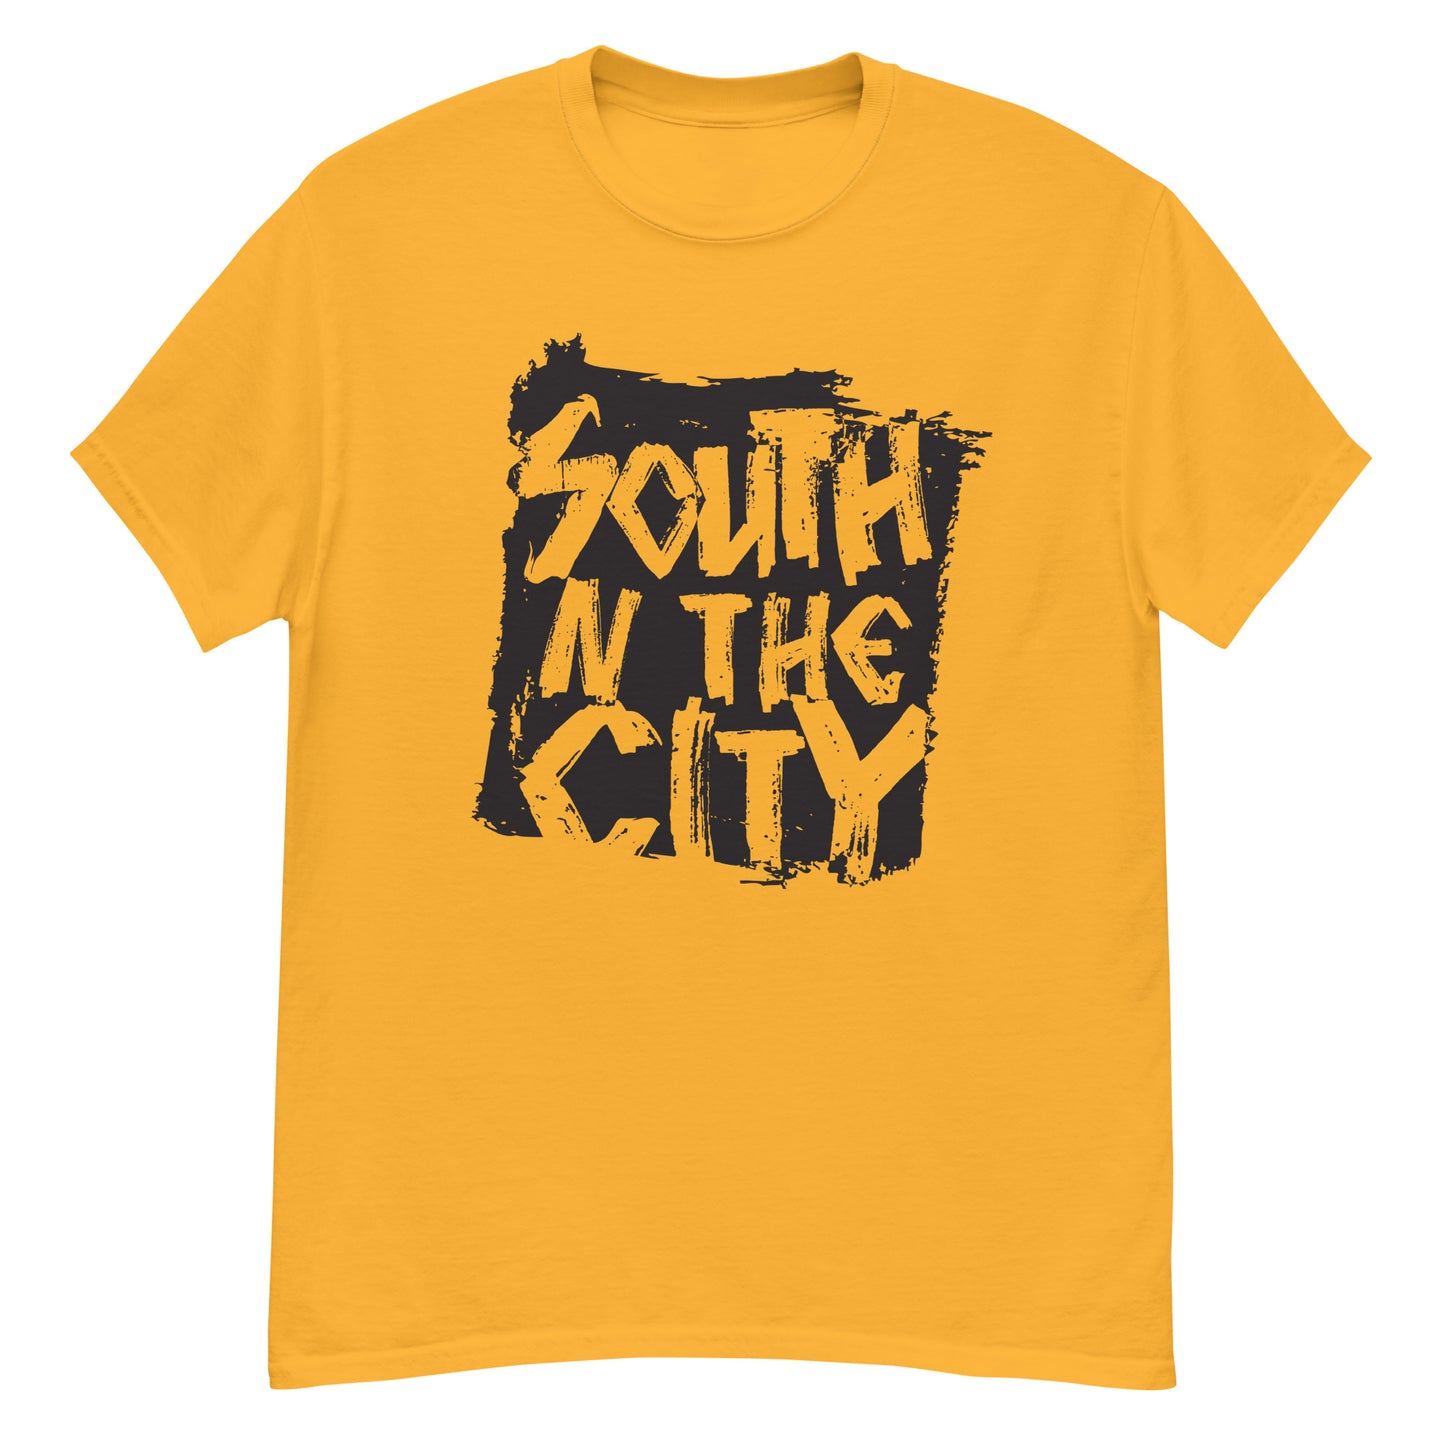 South N the City Summer 2 classic tee